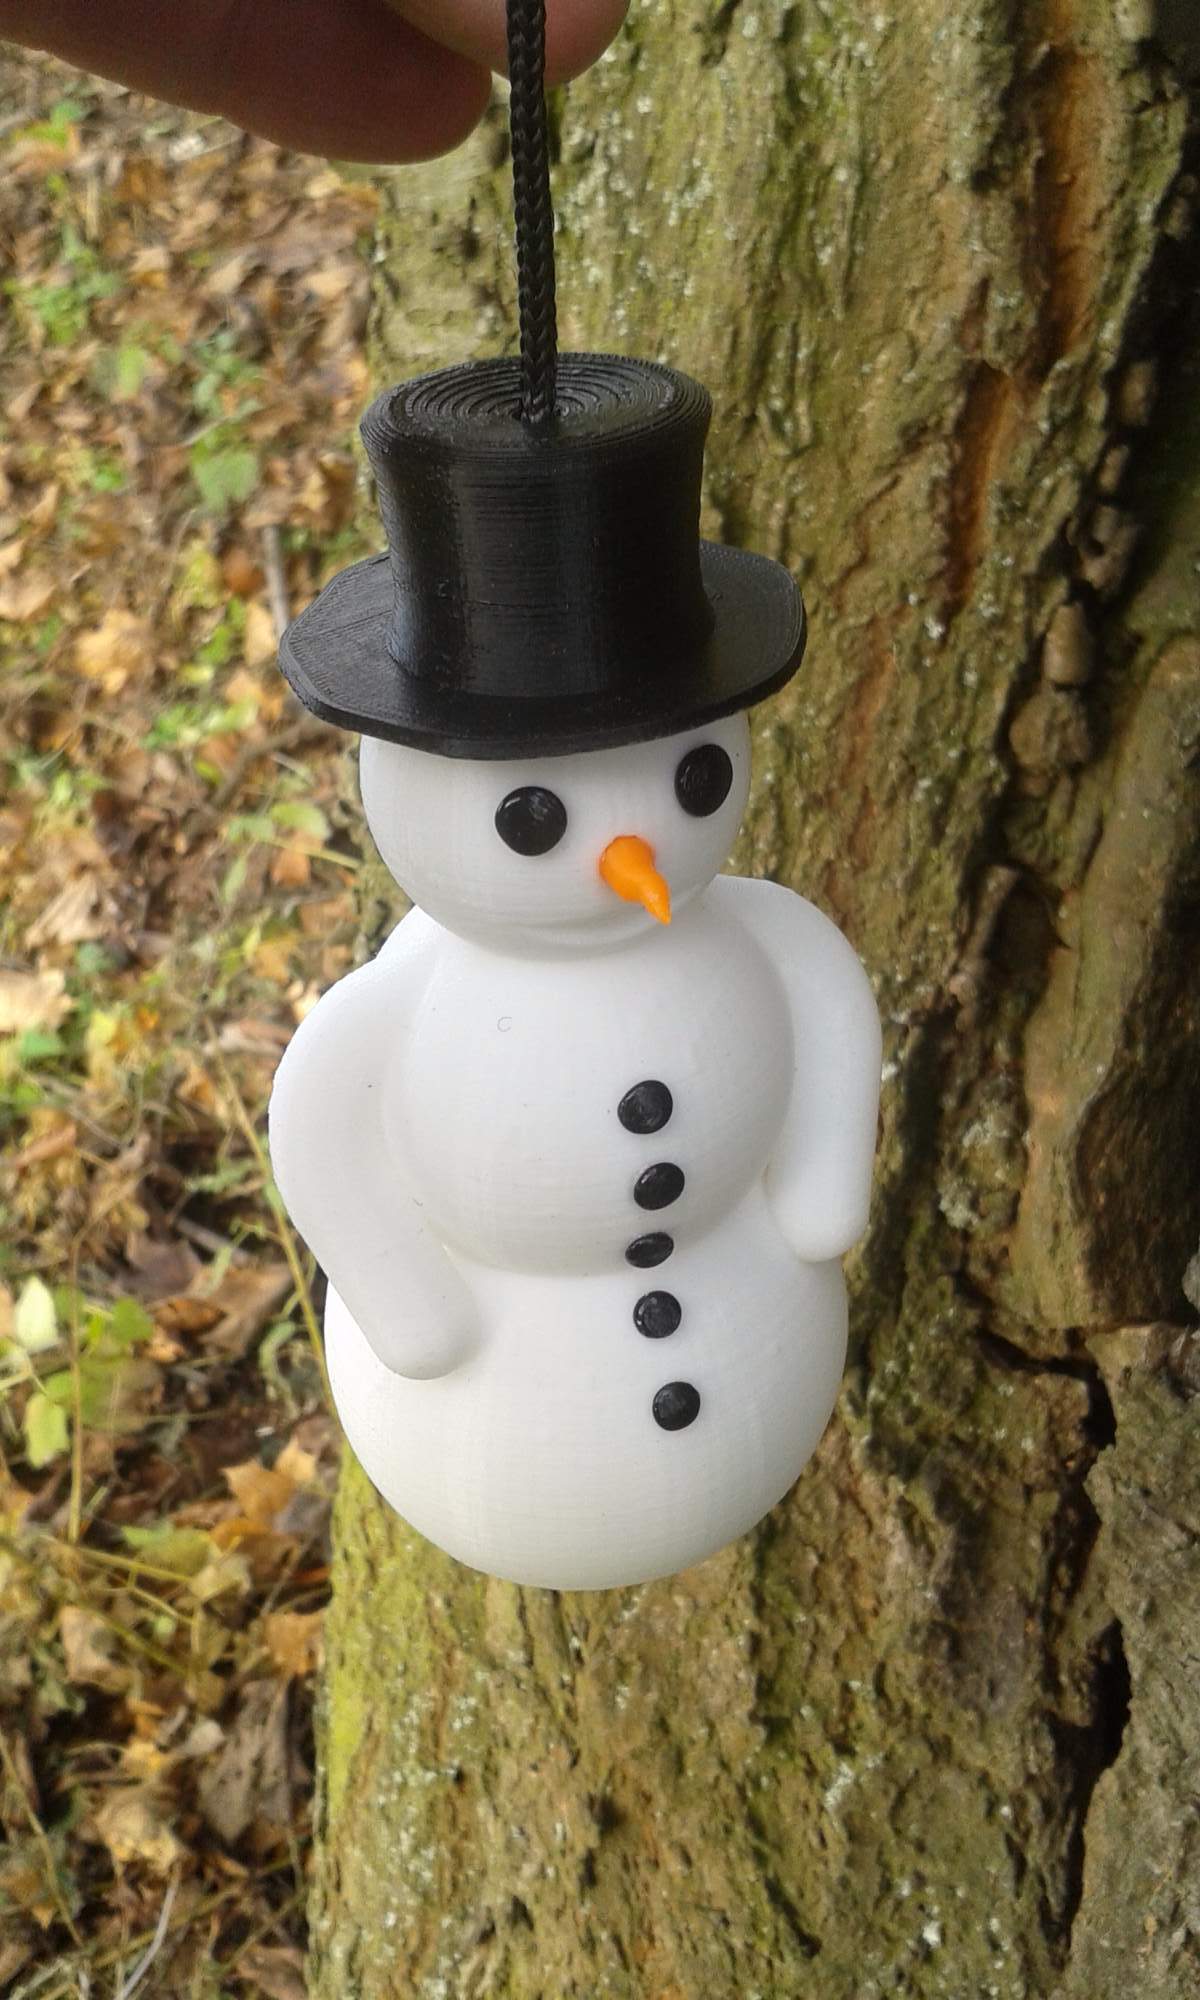 Snowman with screwable hat and hidden compartment (Key-stash; GEOCACHING...)